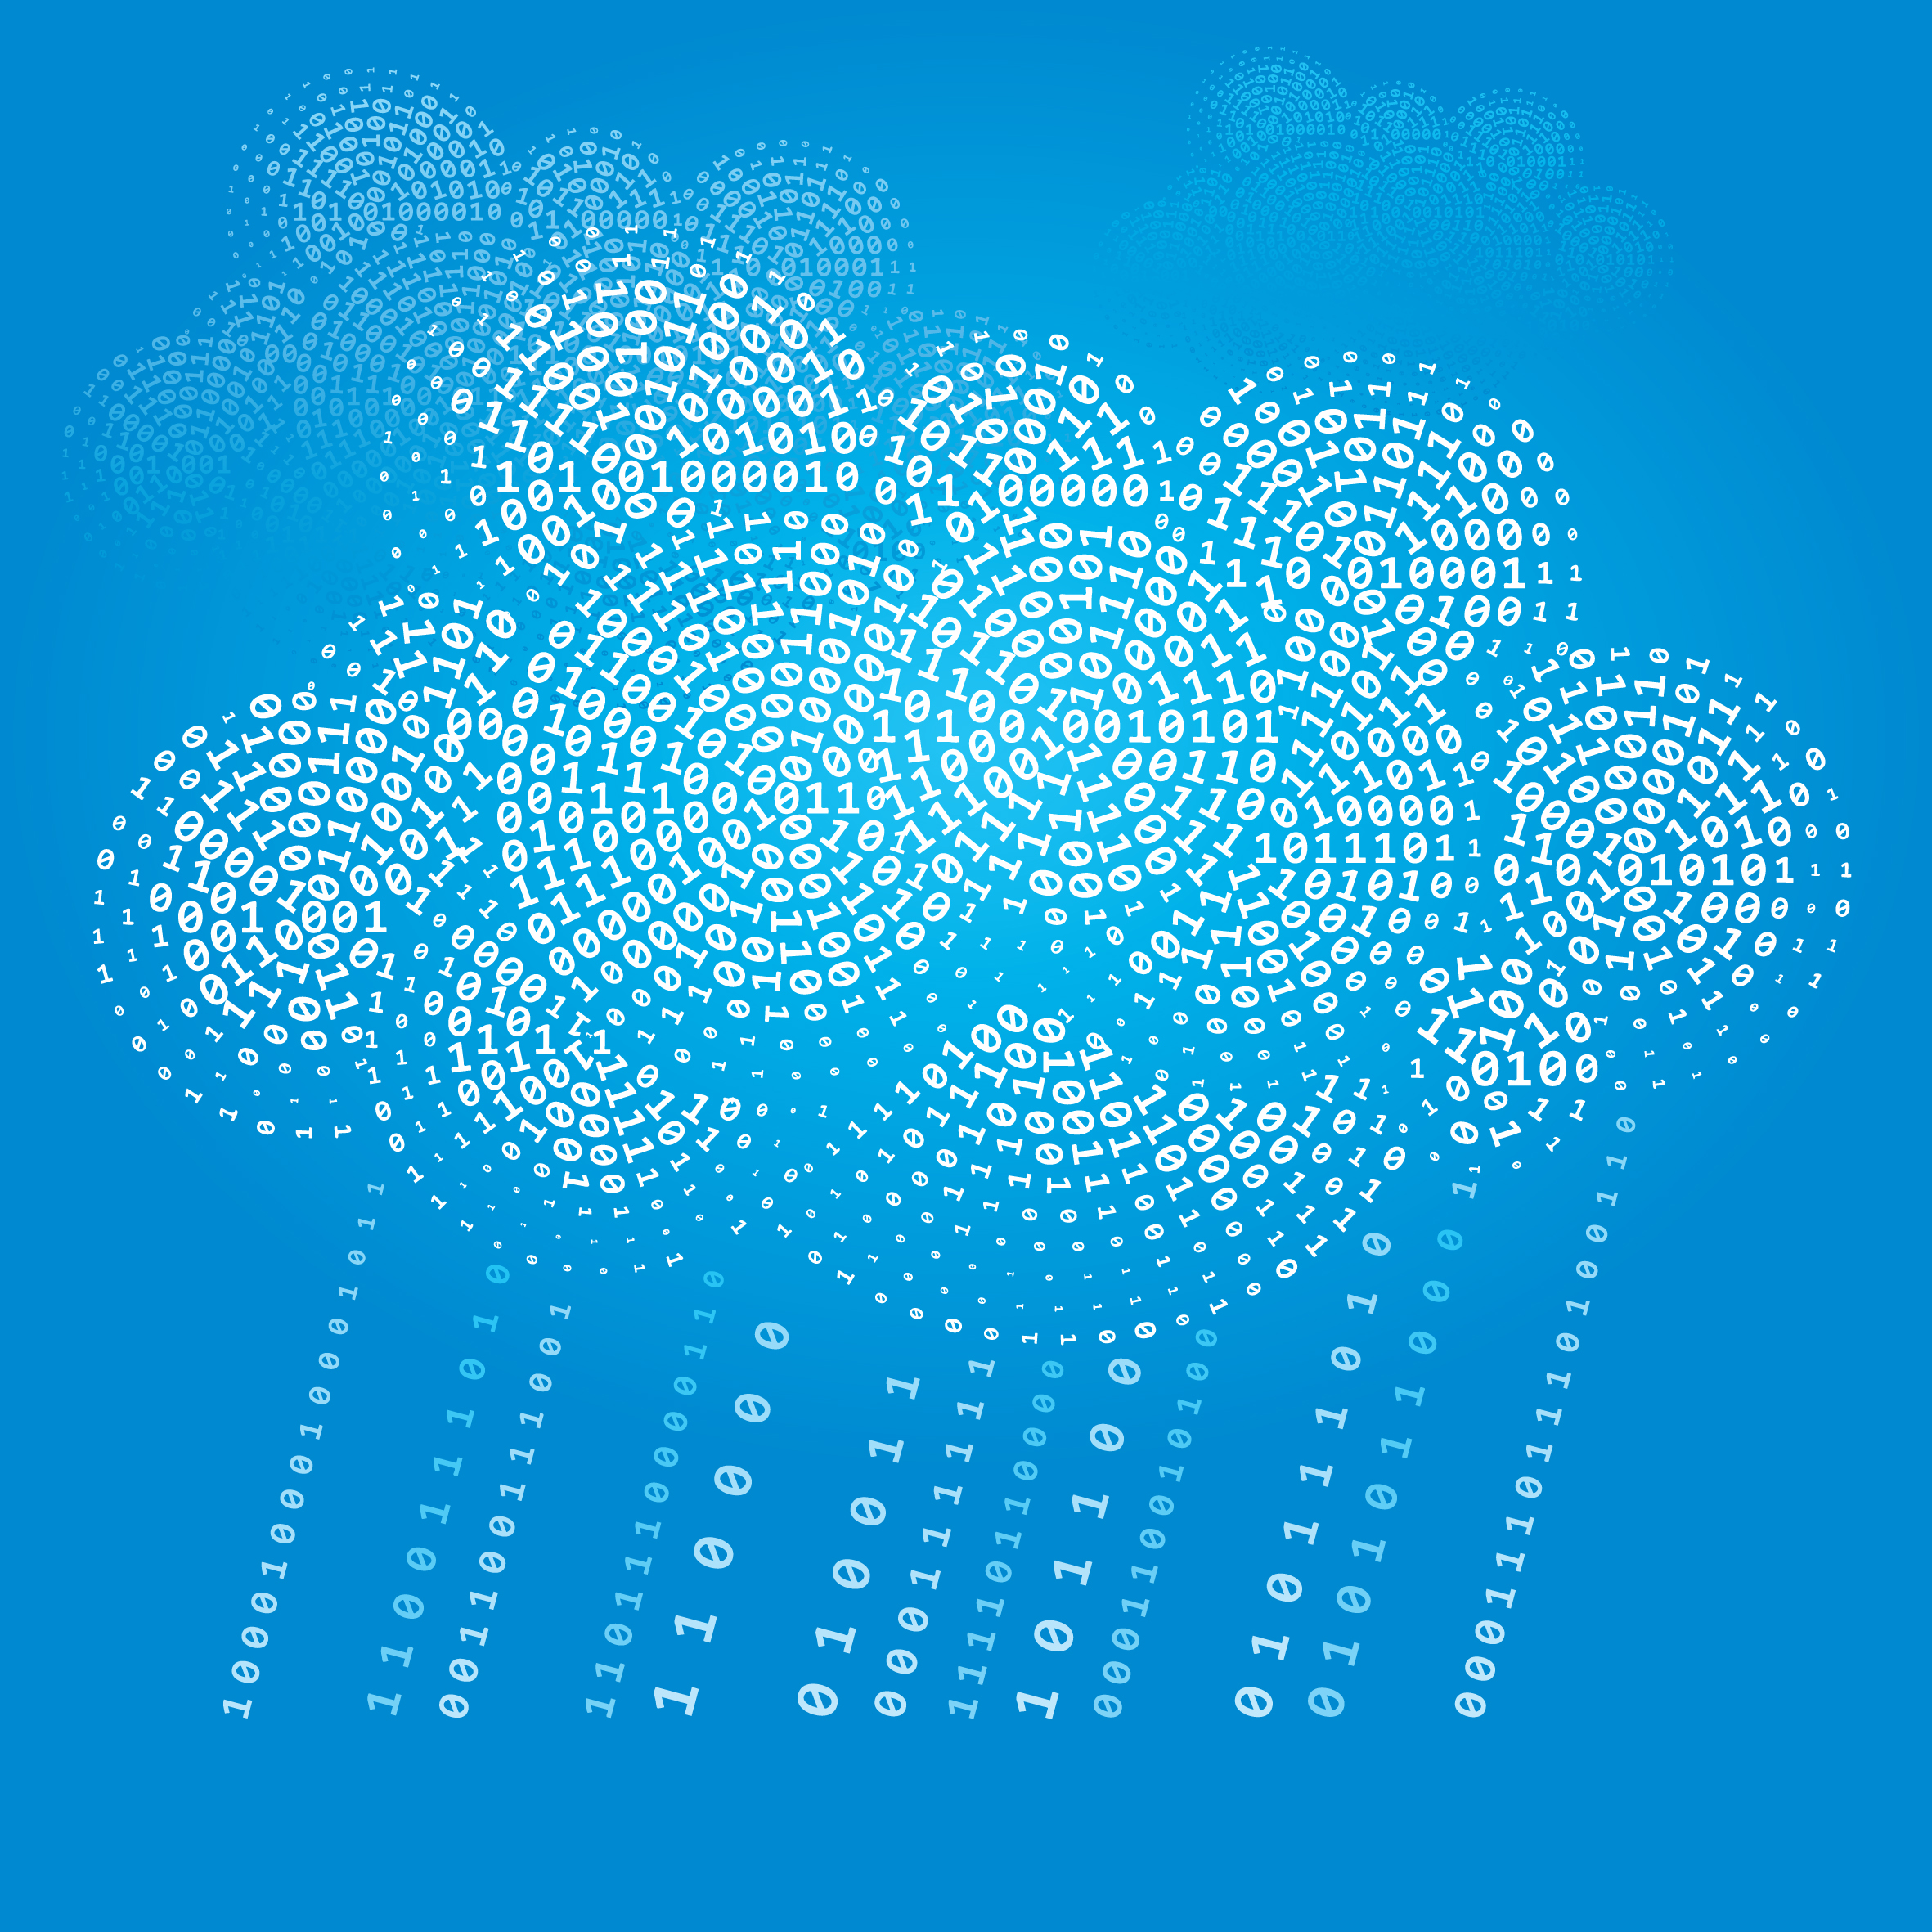 White binary code in the shape of a raincloud over a blue background